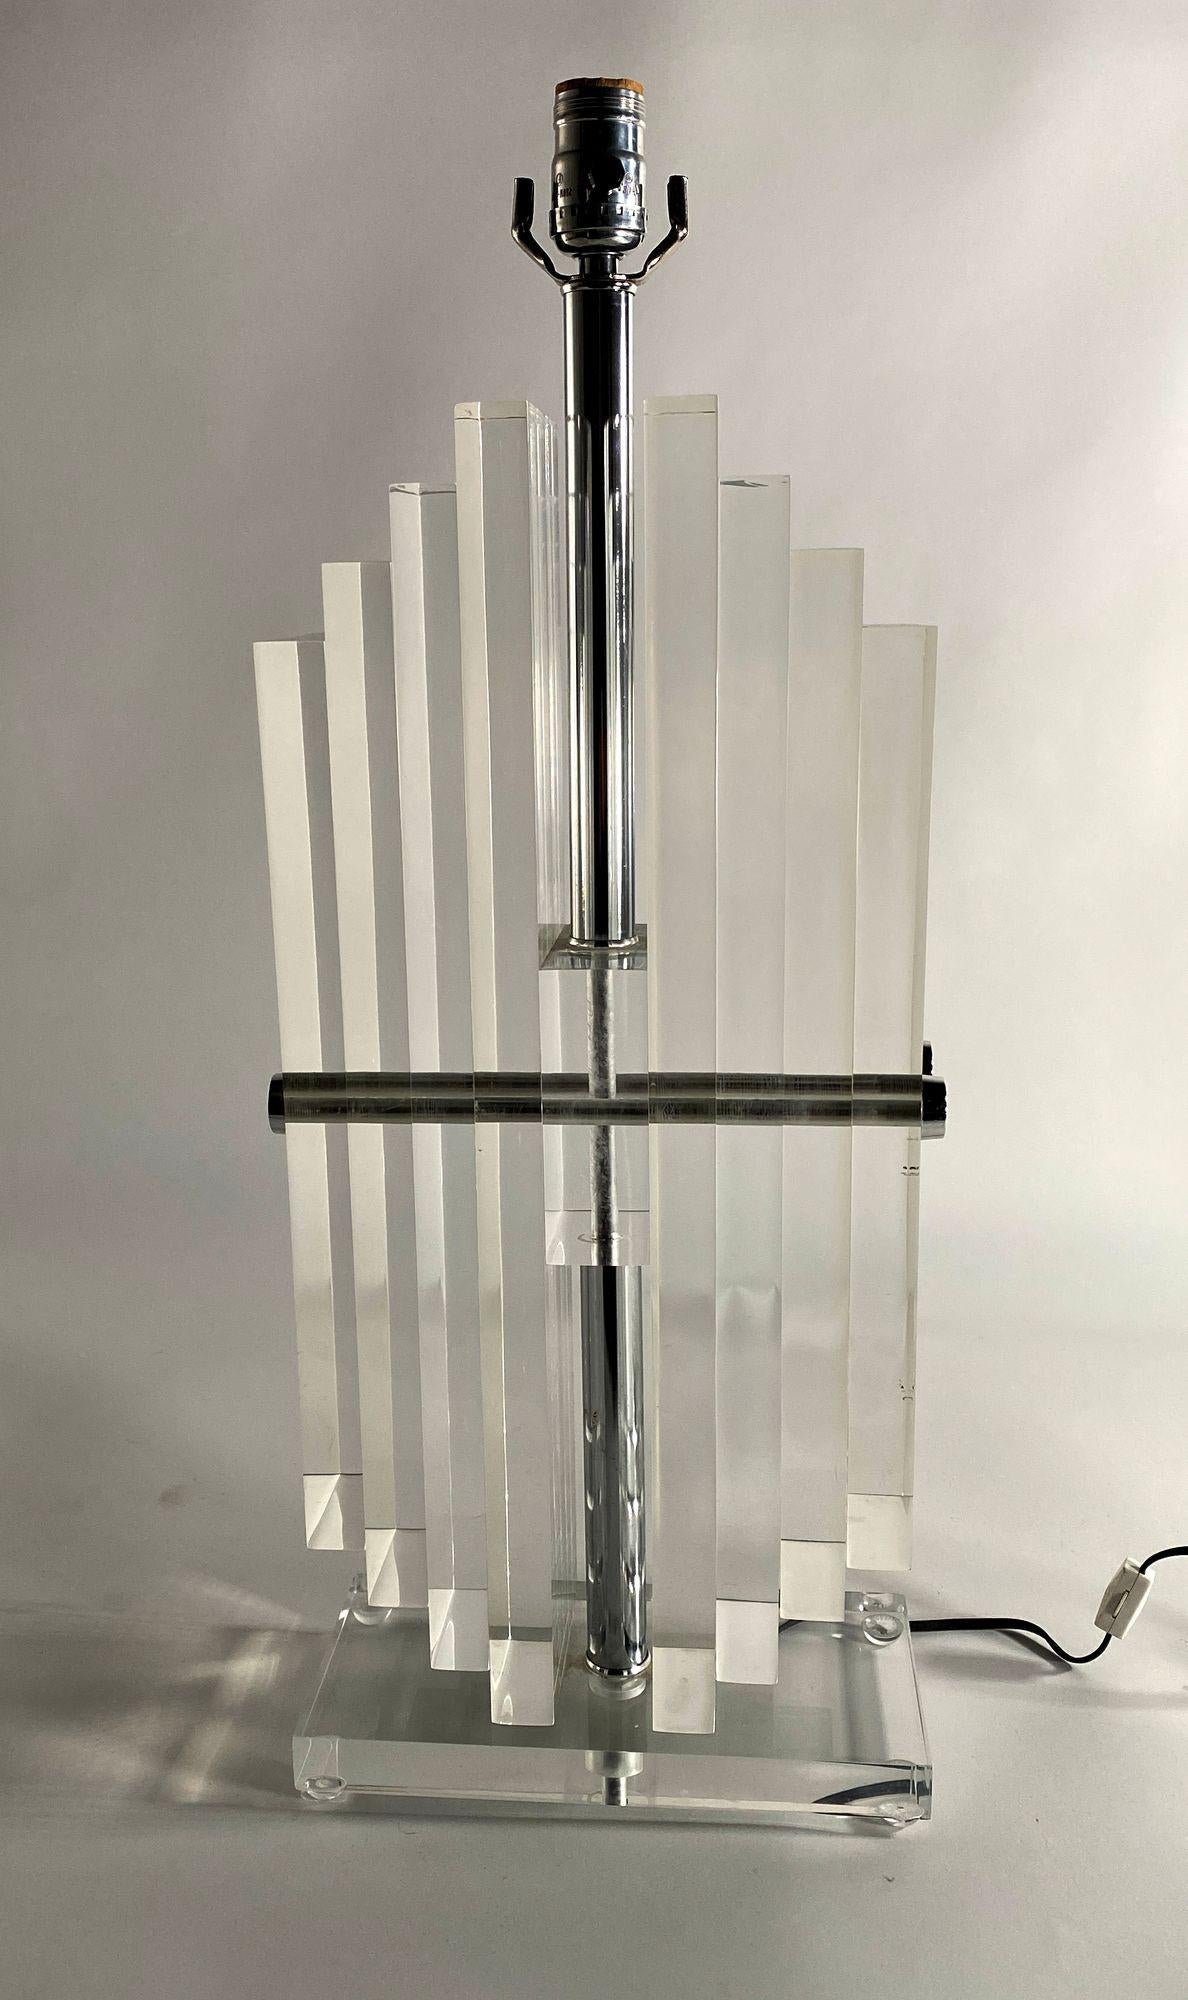 American modern stacked lucite lamps by Karl Springer. Stacked vertical shapes of lucite in staggered patterns sitting upon a lucite base.